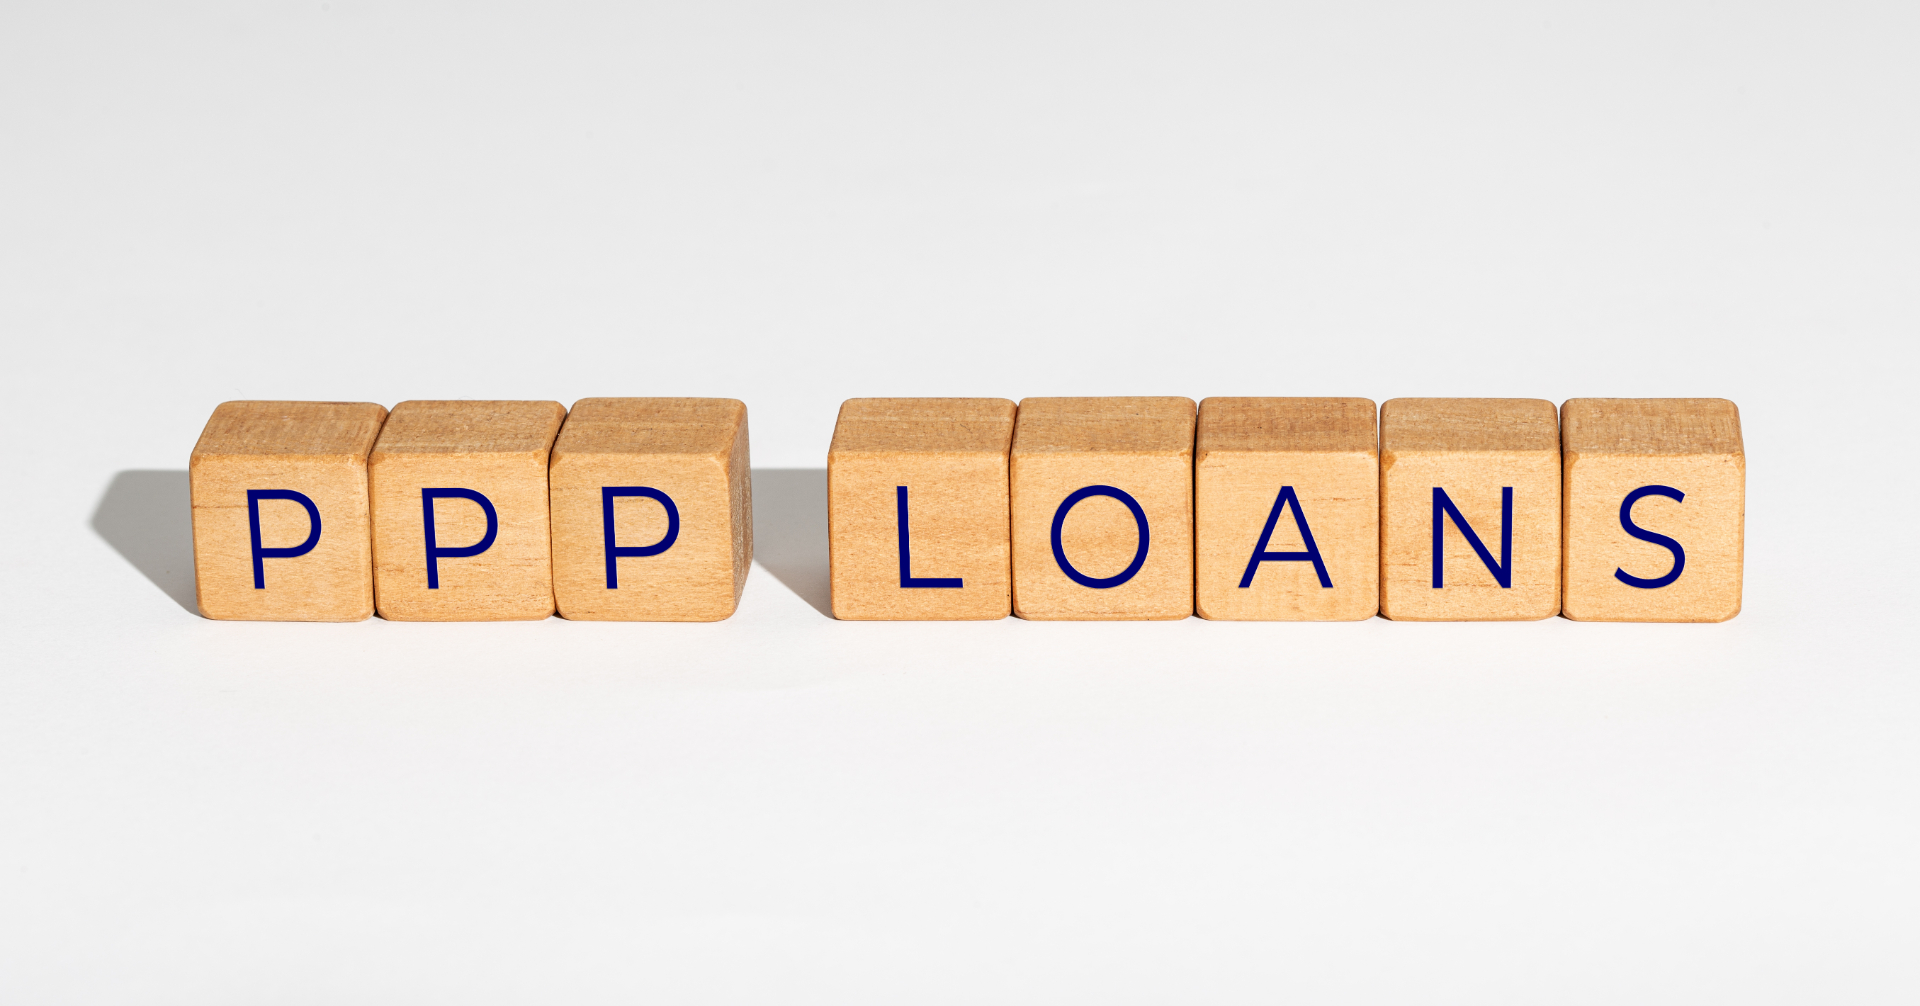 What Is A Ppp Loan Stand For